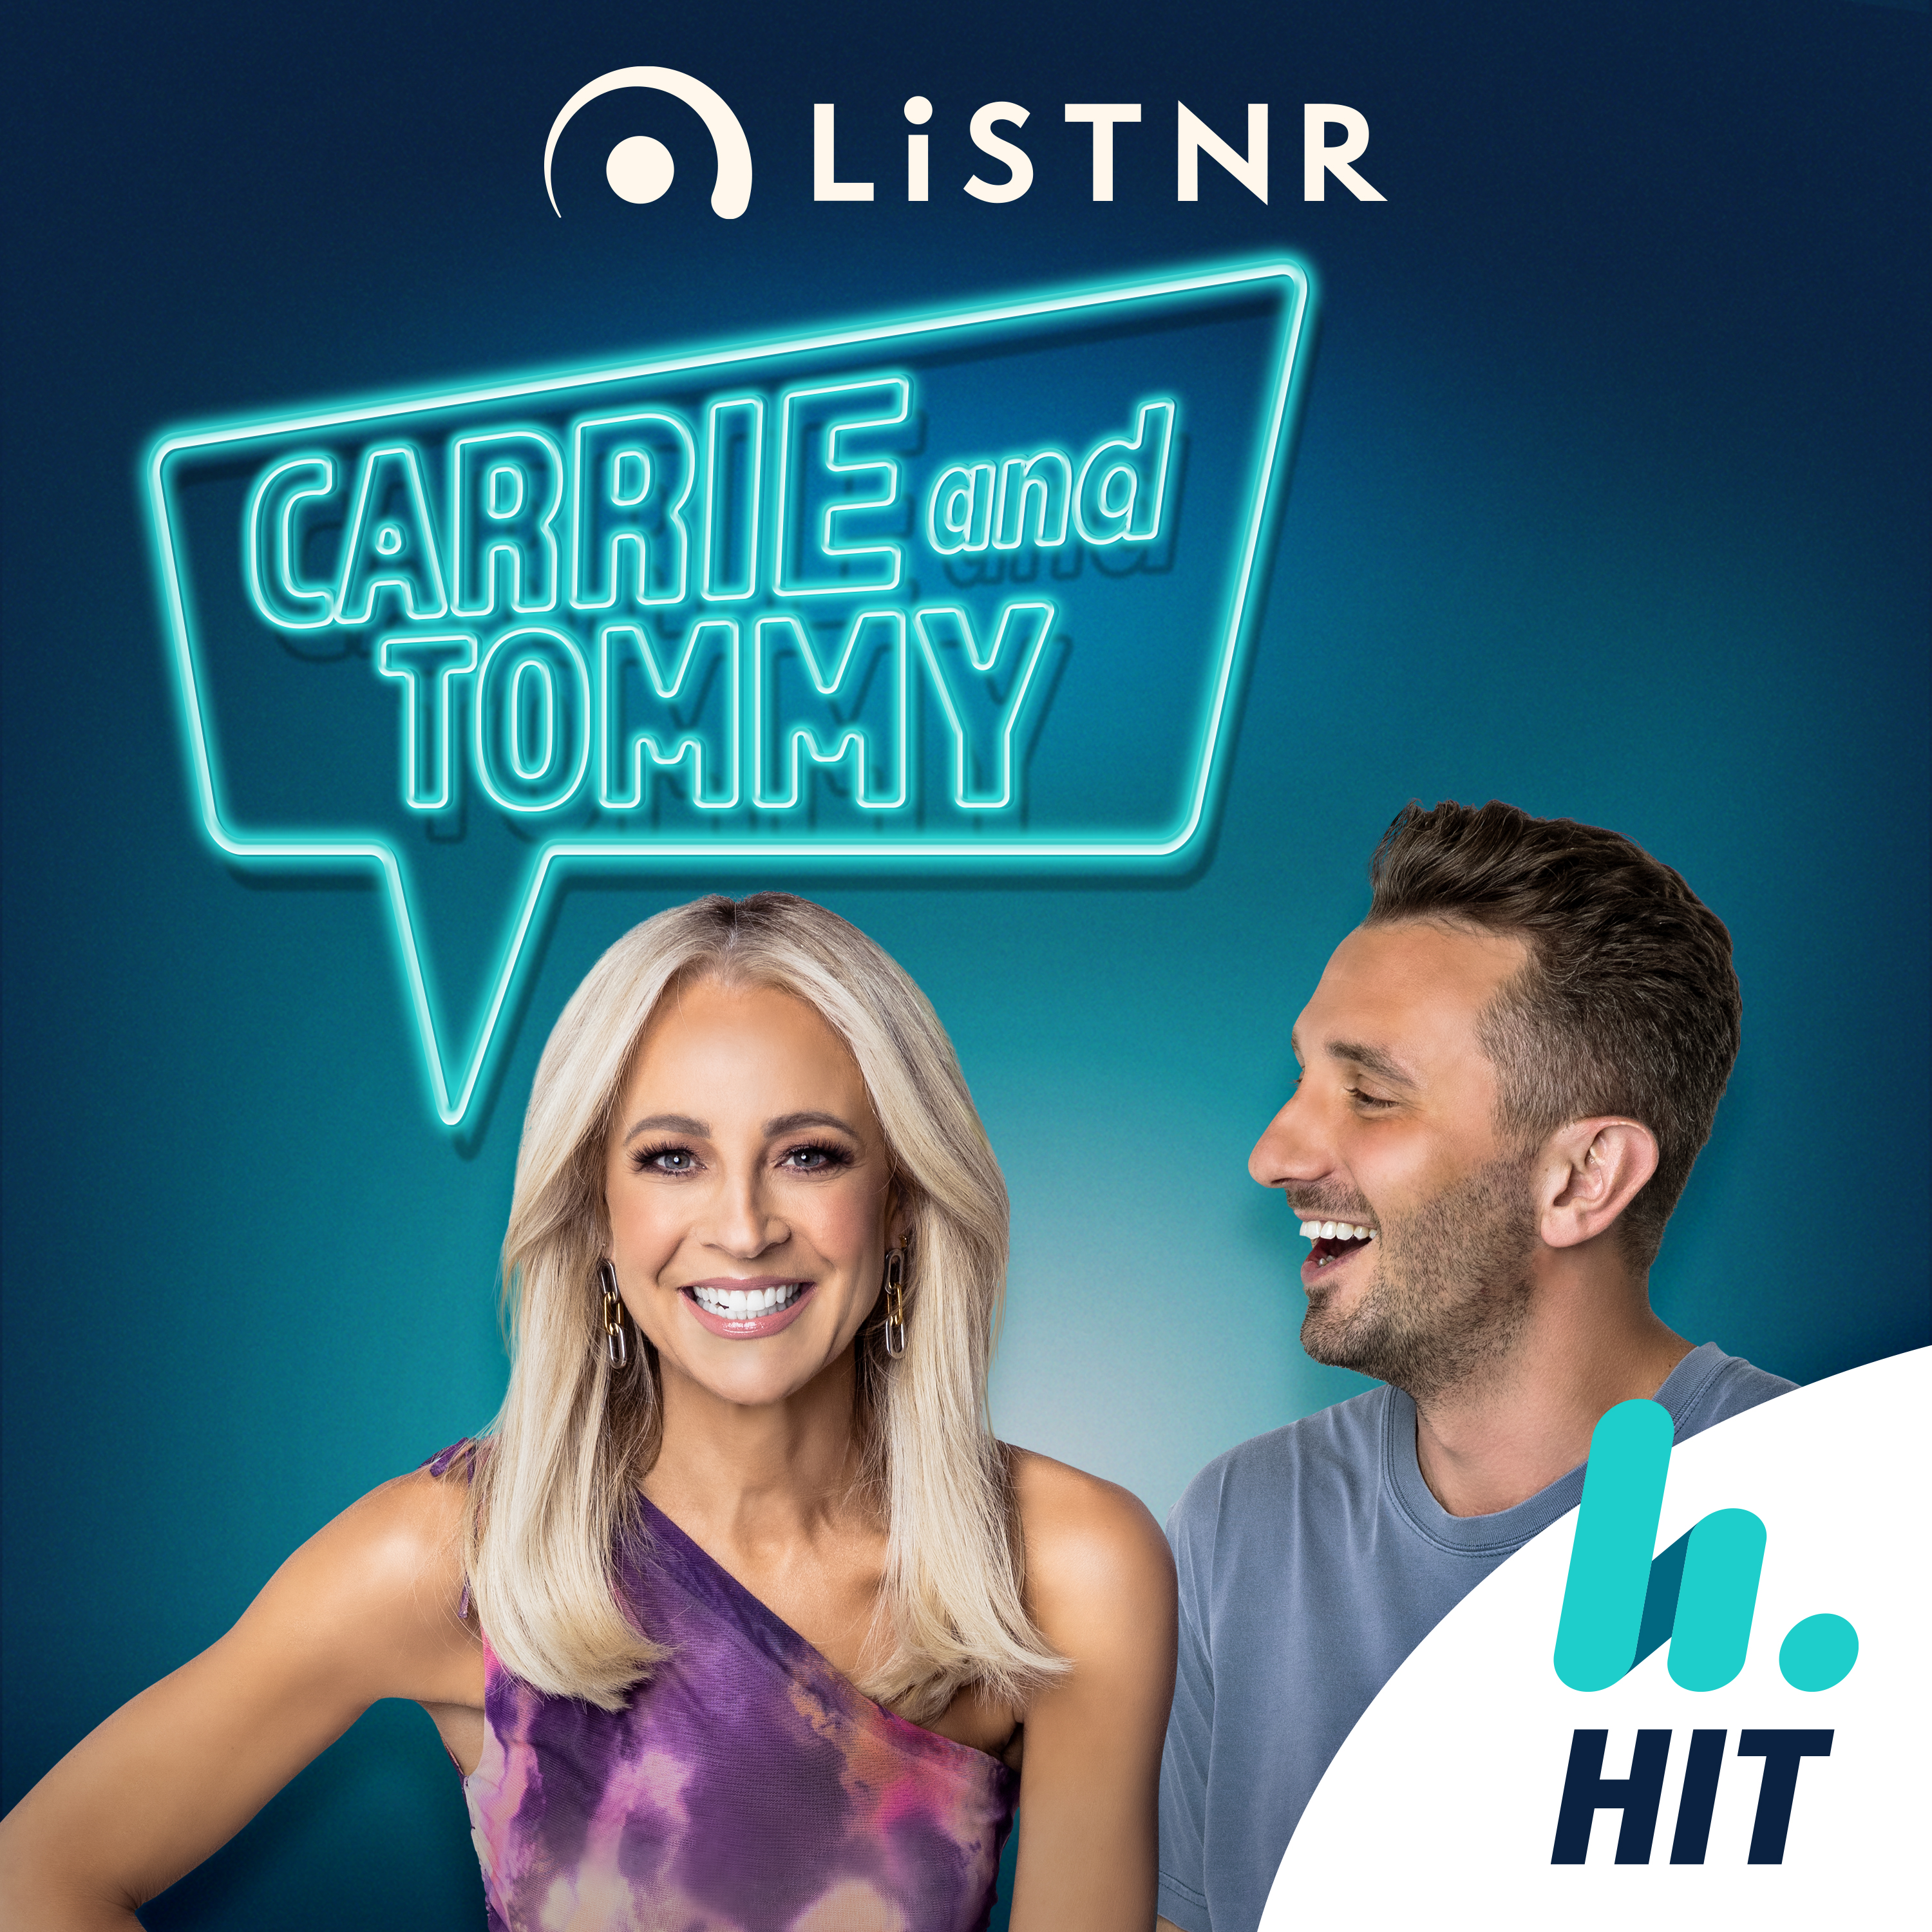 We're joined by Mel B and we team up to surprise the listeners that we brought! Plus which English food does Tommy wish he could bring home with him?